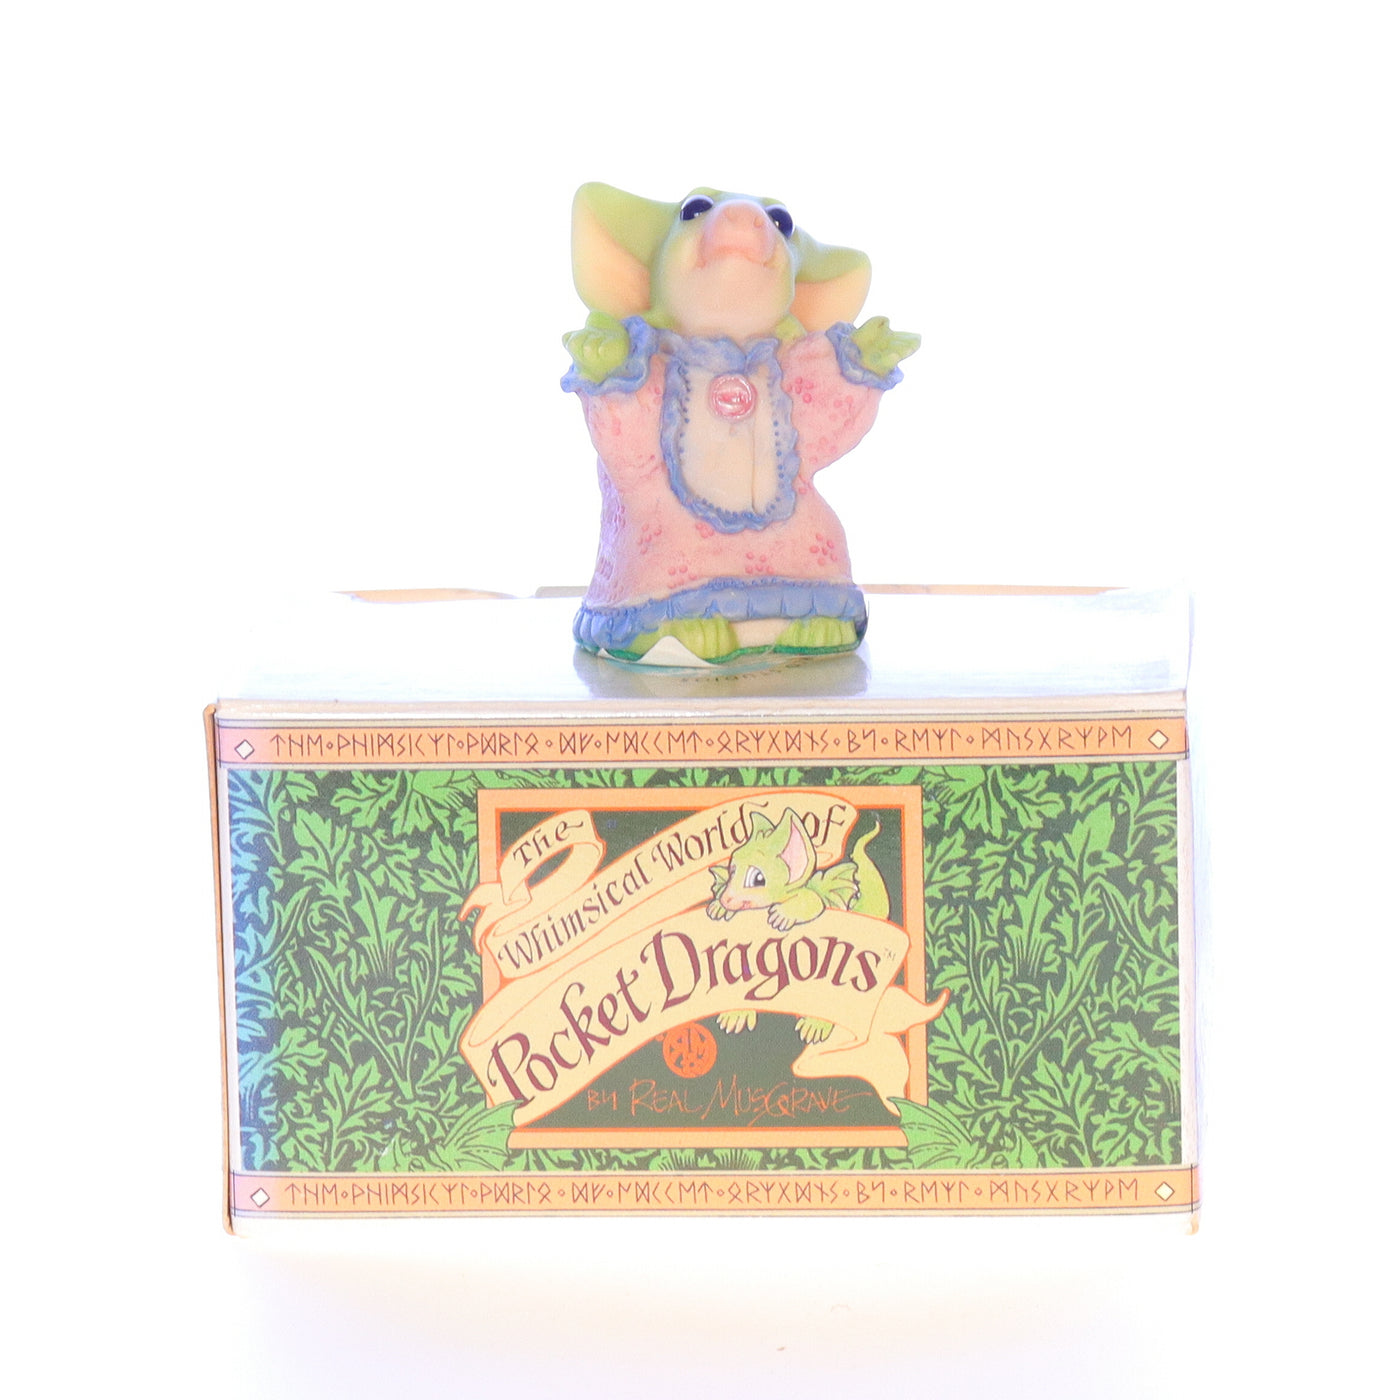 Whimsical_World_of_Pocket_Dragons_053839028998_Flannel_Nightie_Fantasy_Figurine_1998_Box Front View